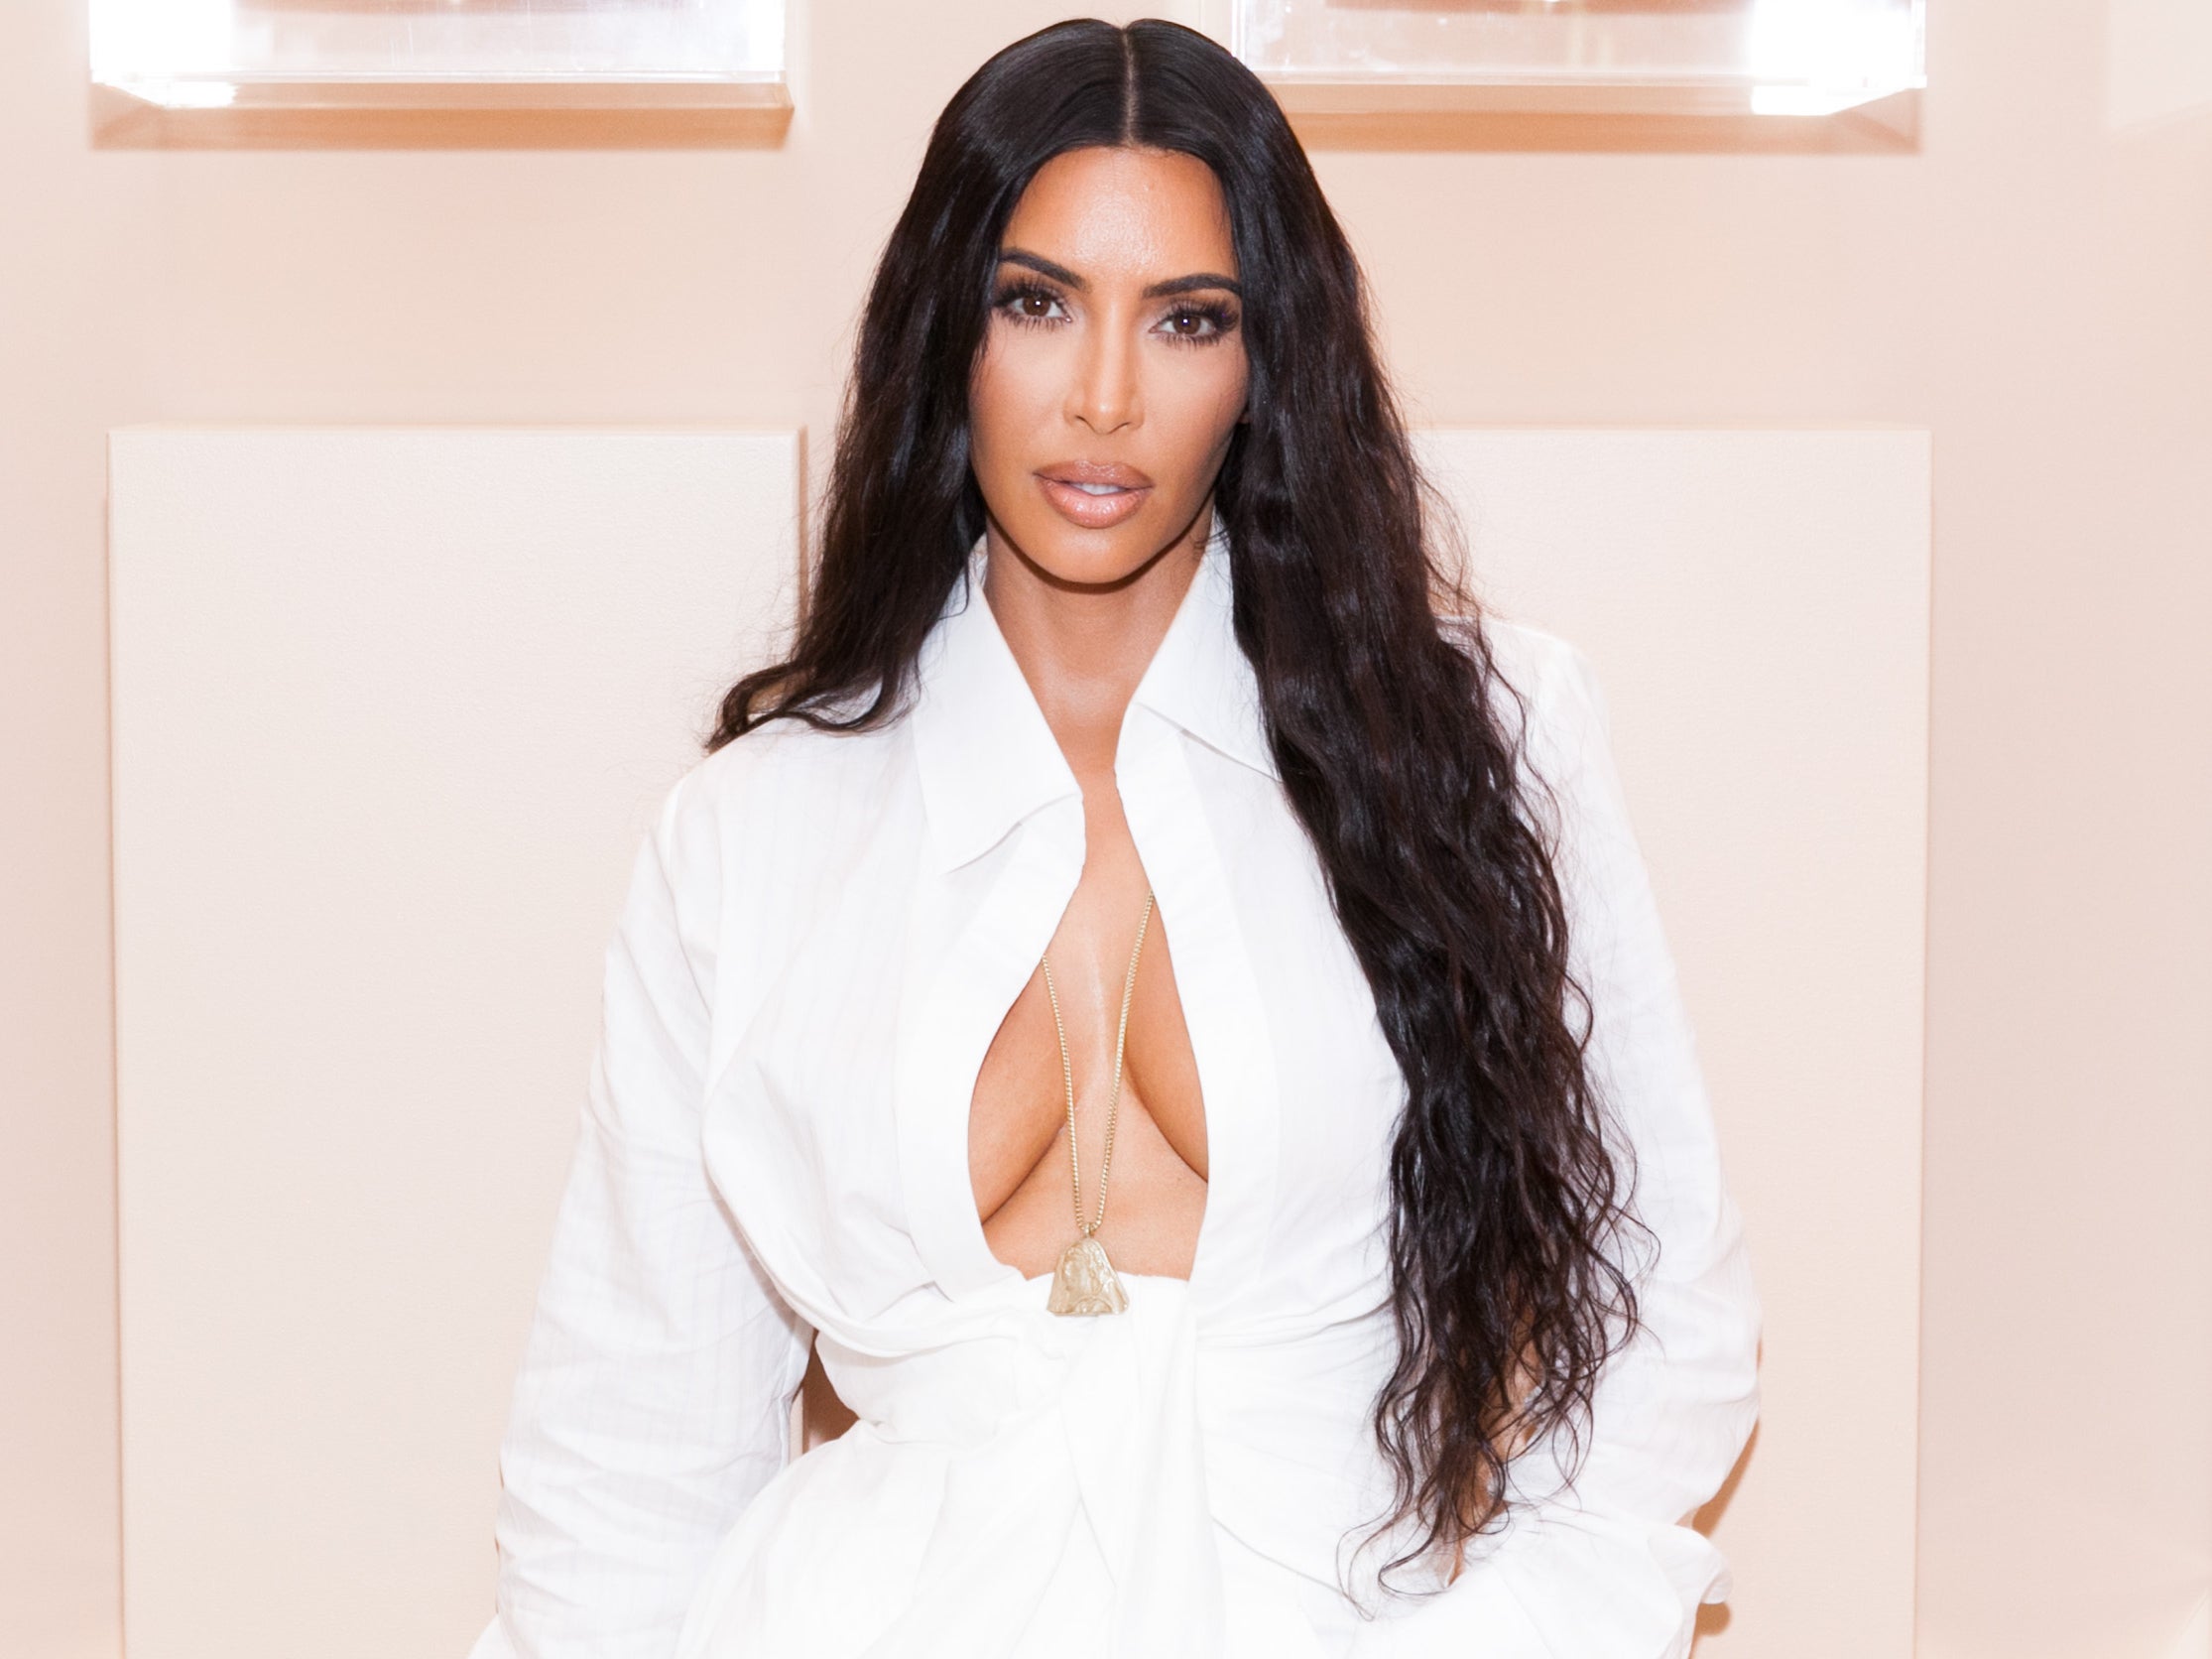 kim-kardashian-called-tone-deaf-after-flying-friends-to-private-island-for-birthday-party